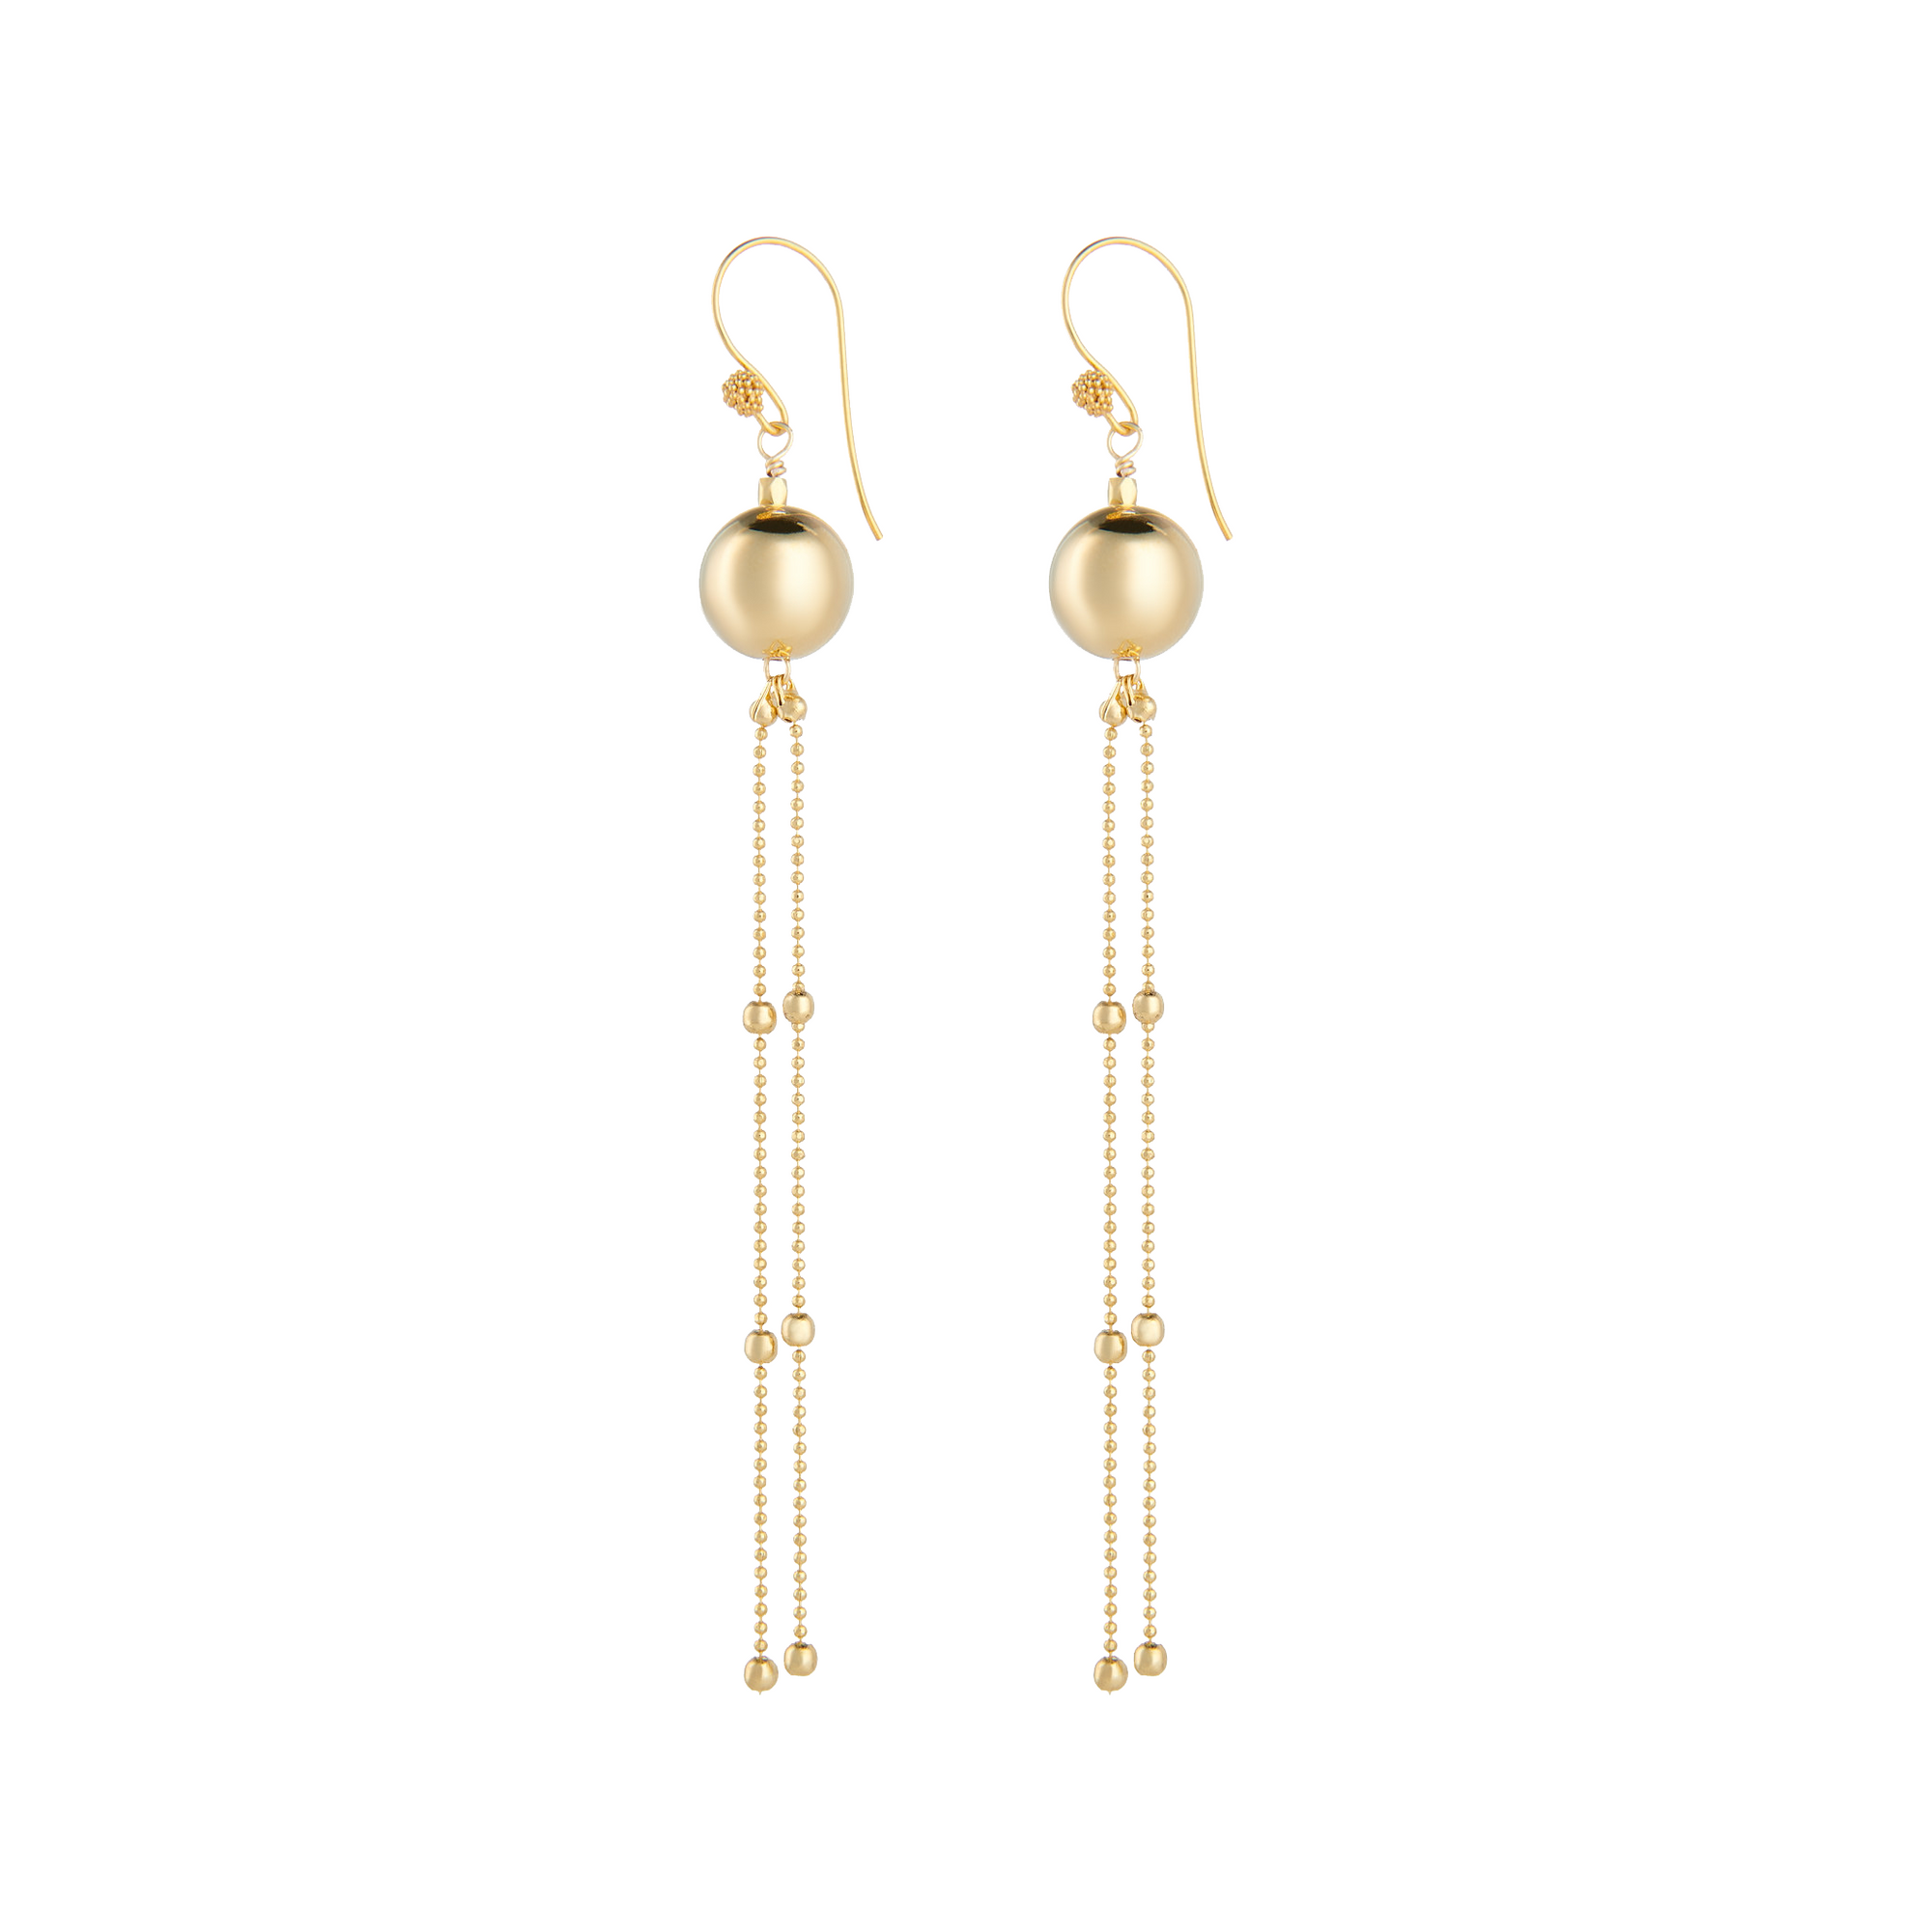 Gold ball chain double row earrings by vivien walsh